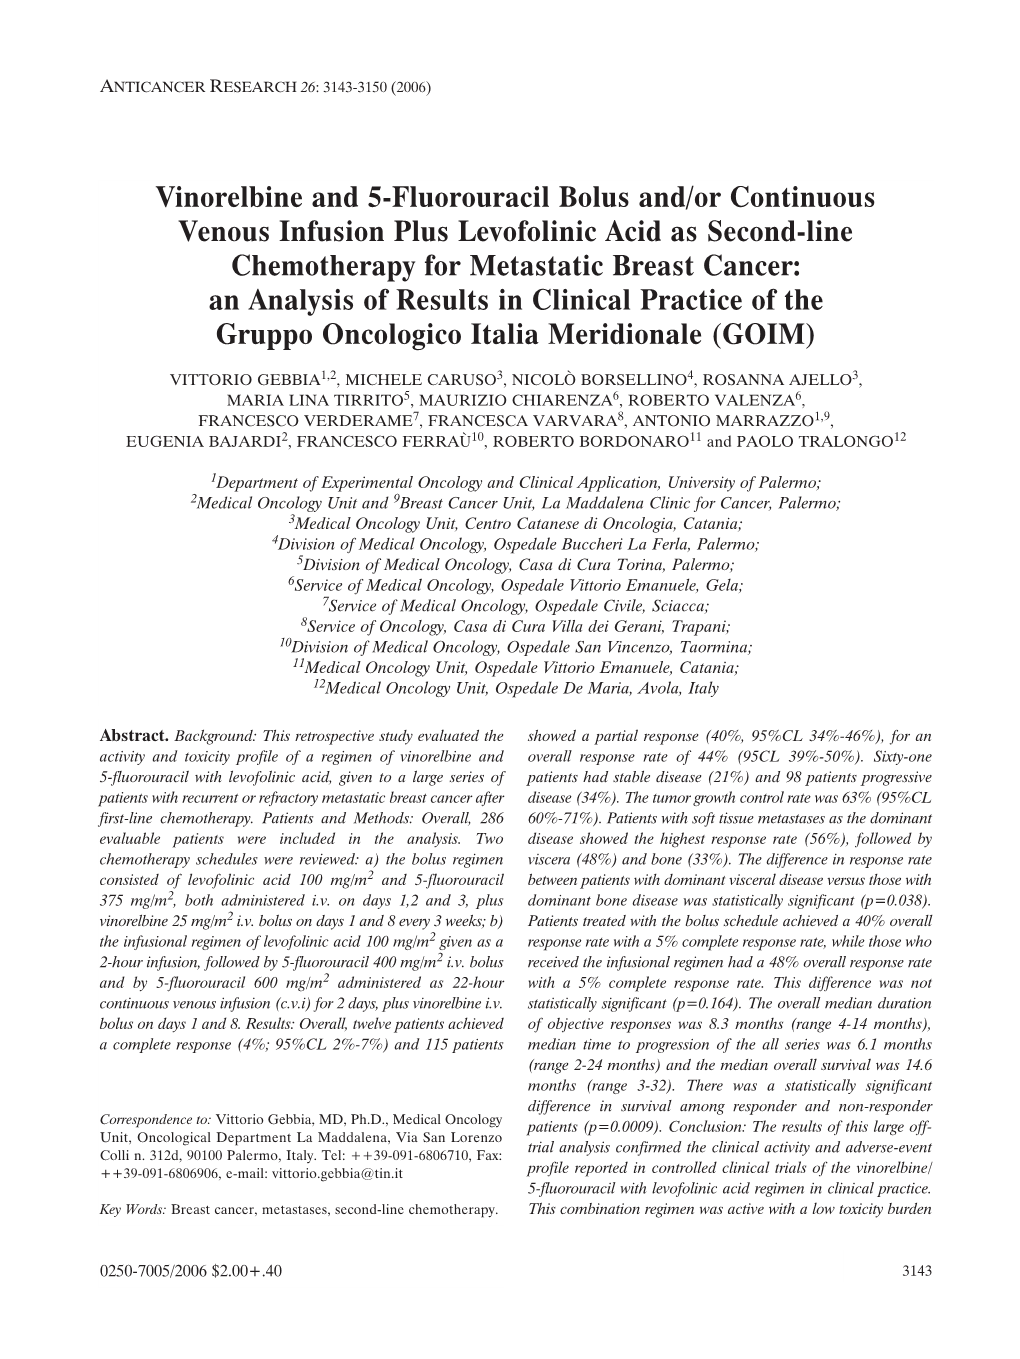 Vinorelbine and 5-Fluorouracil Bolus And/Or Continuous Venous Infusion Plus Levofolinic Acid As Second-Line Chemotherapy For